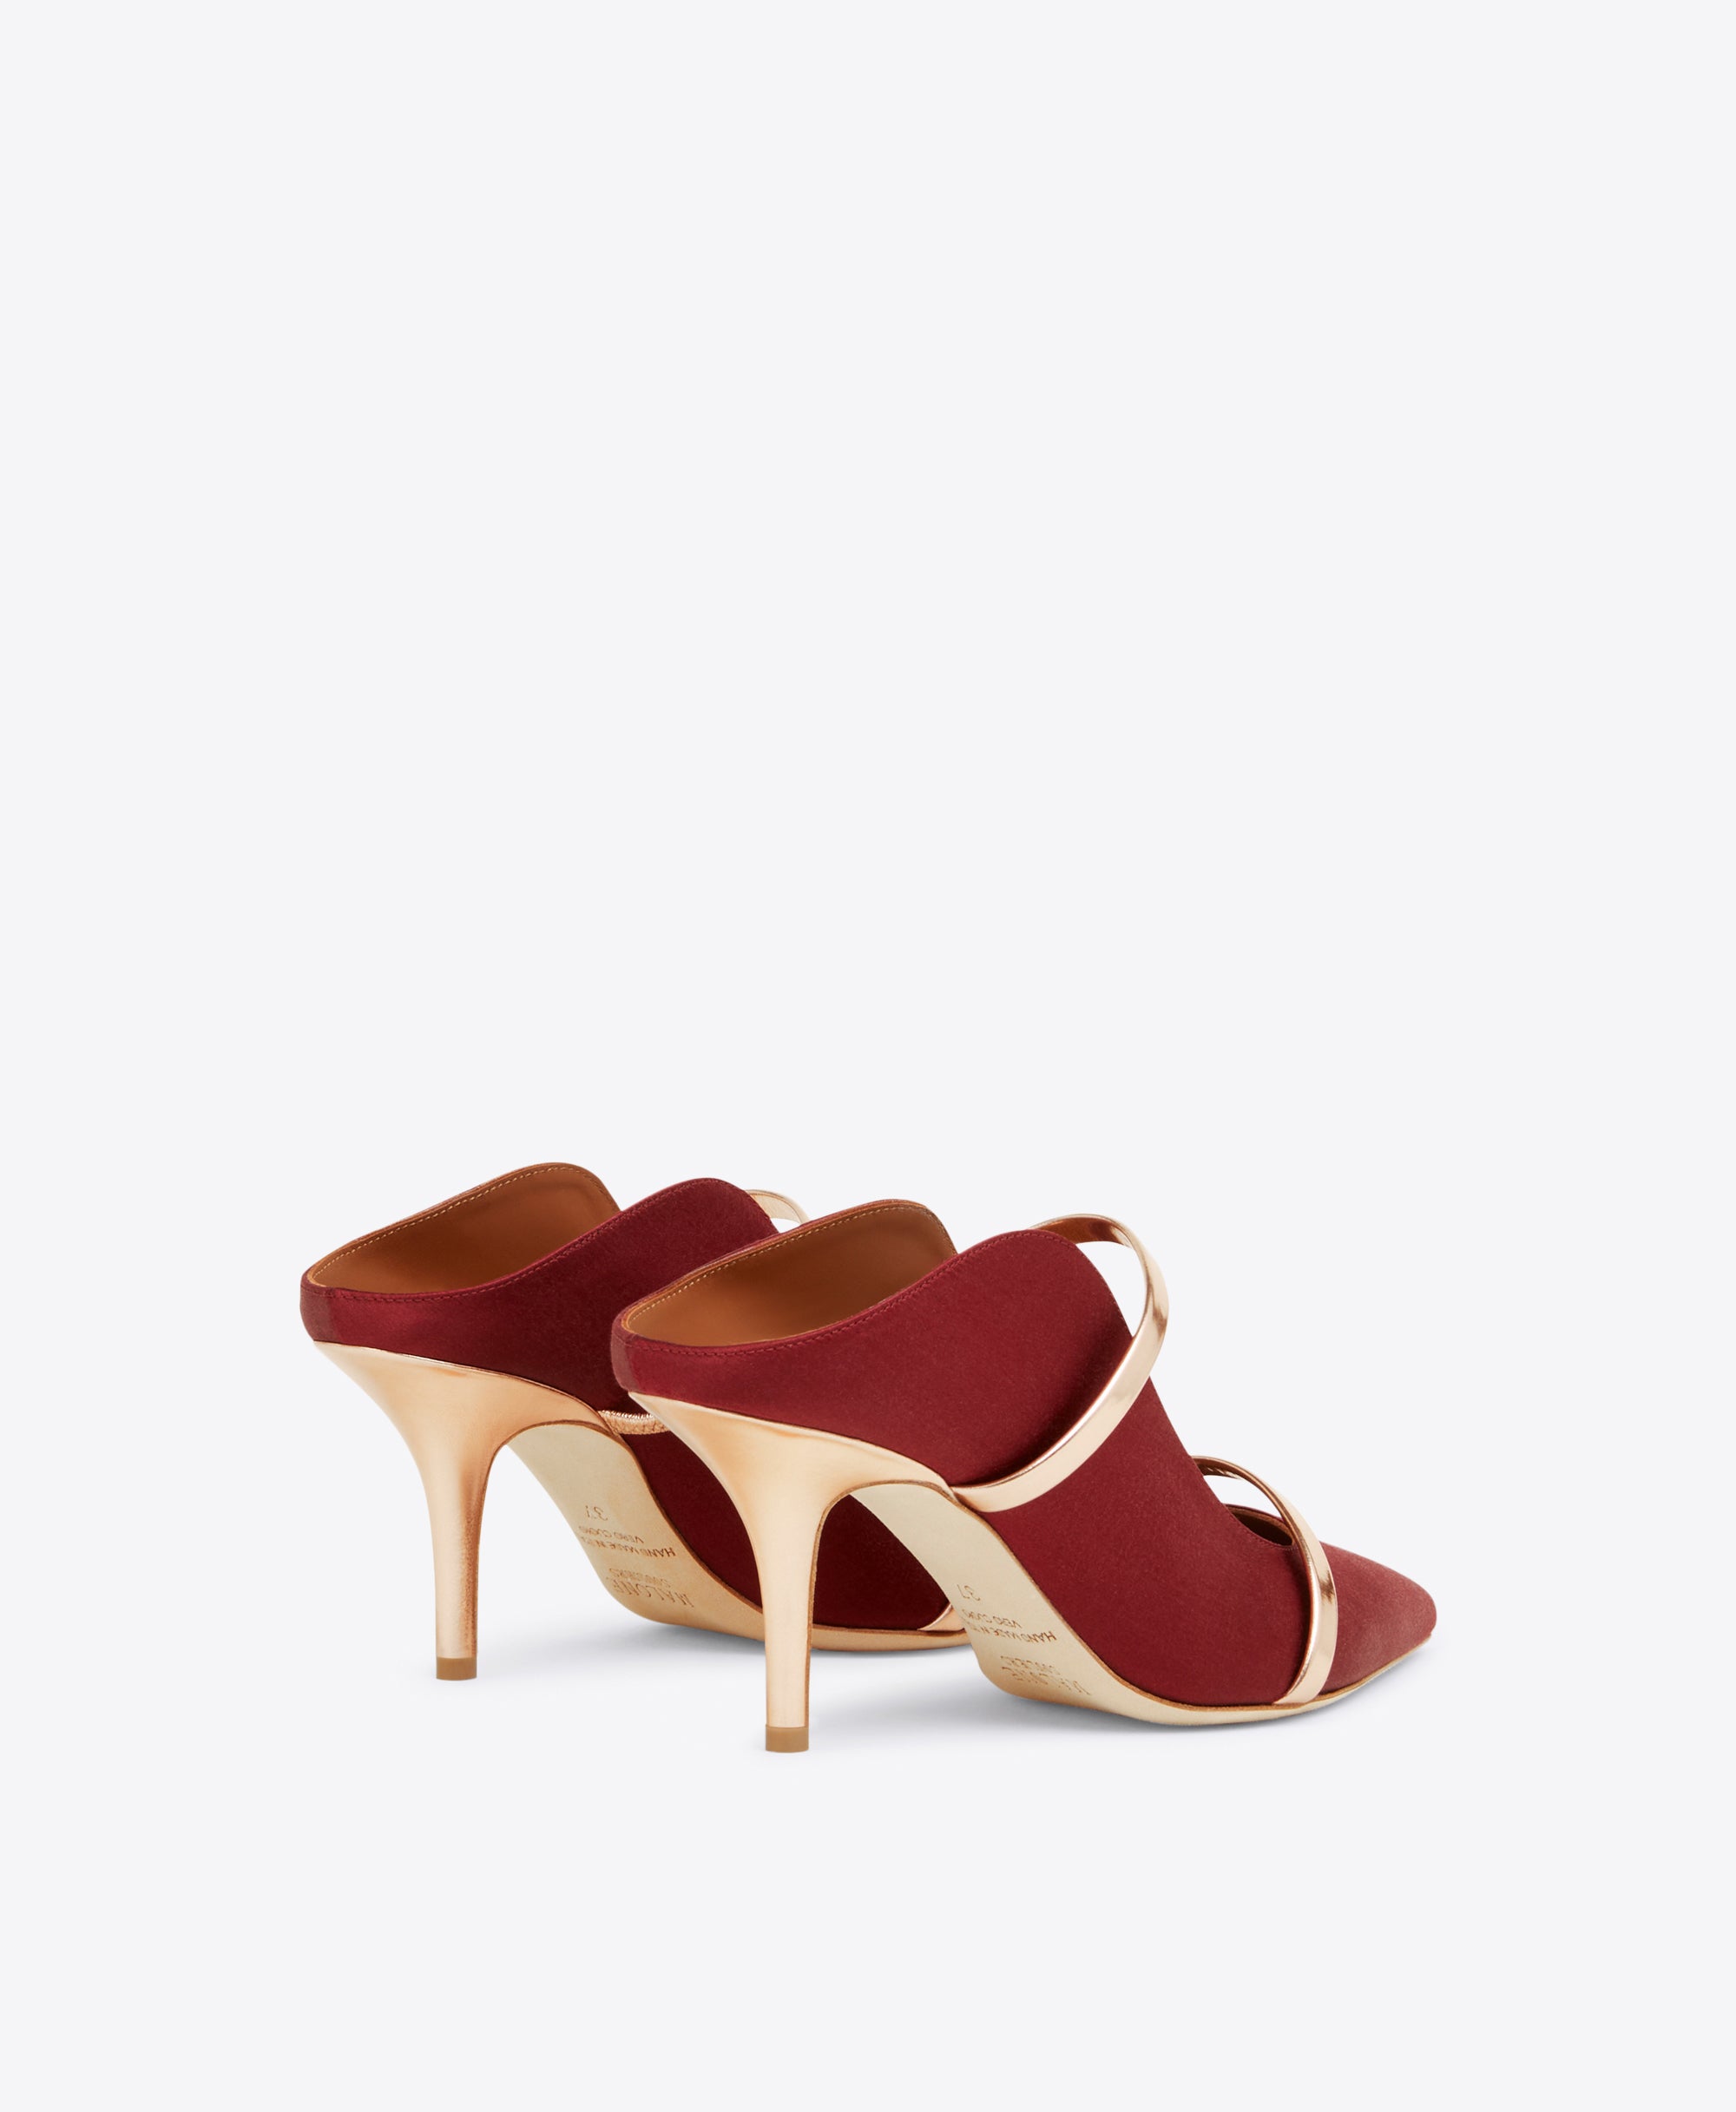 Women's Red Satin Pointed Toe Heeled Mules with Rose Gold Leather Straps Malone Souliers